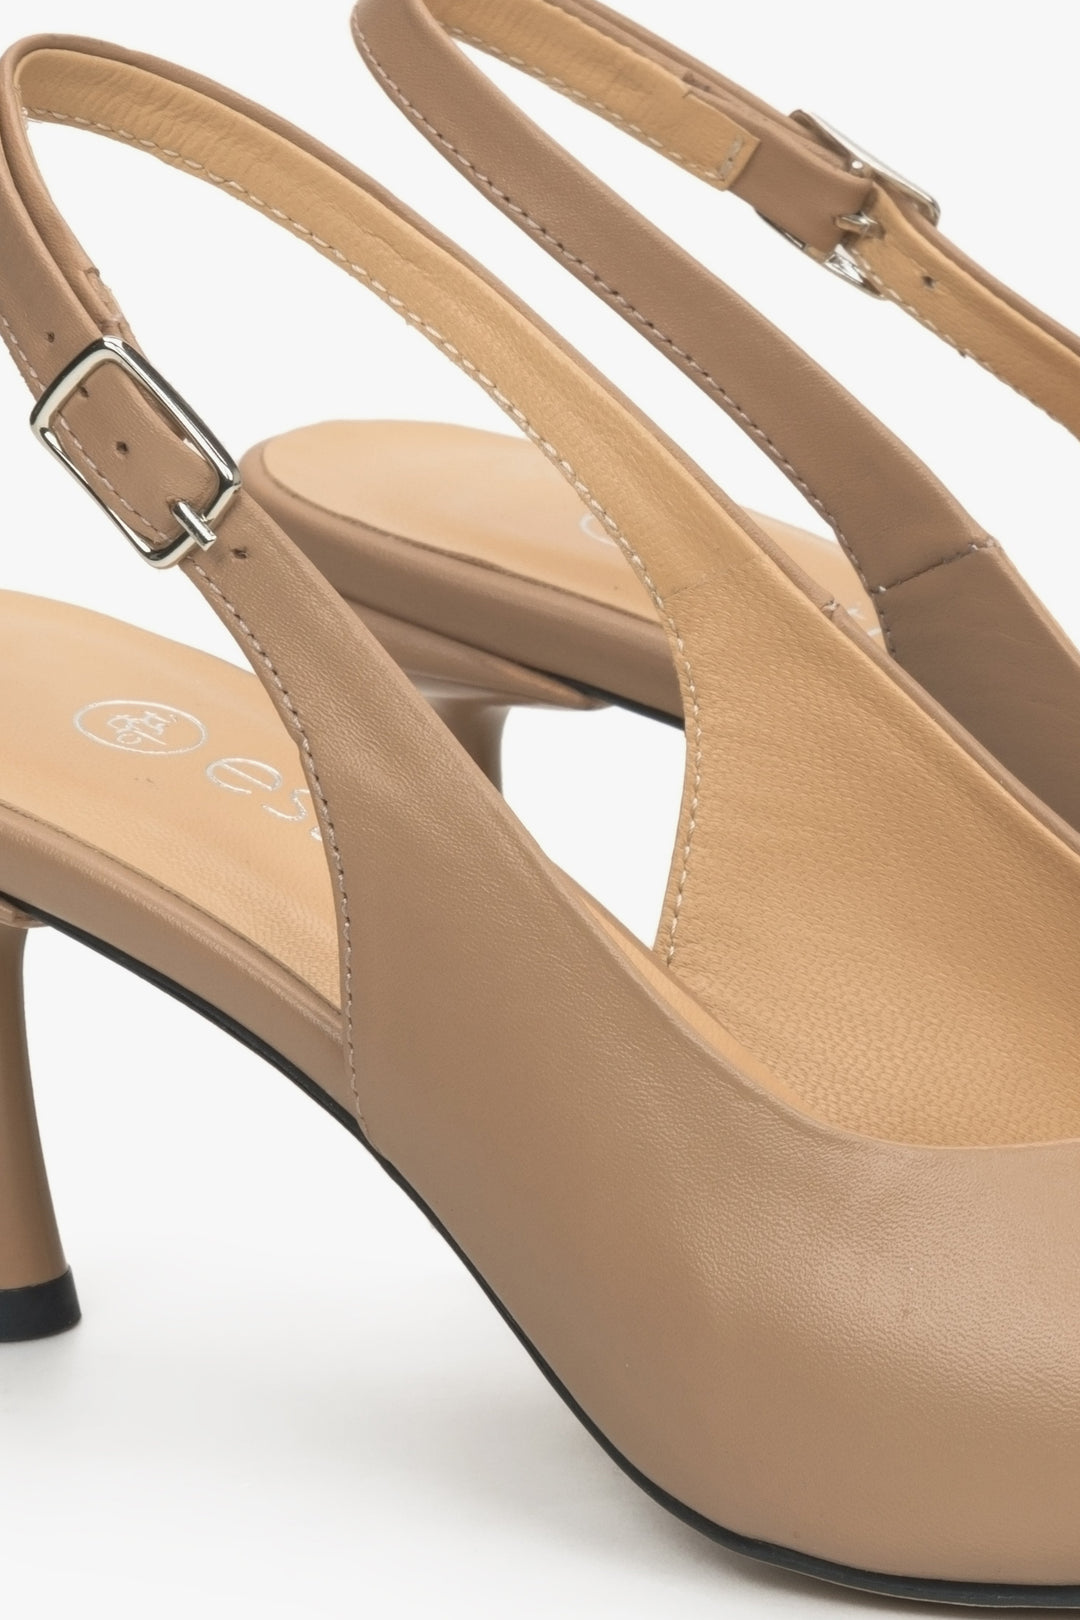 Women's beige leather slingbacks by Estro - close-up on the detail.